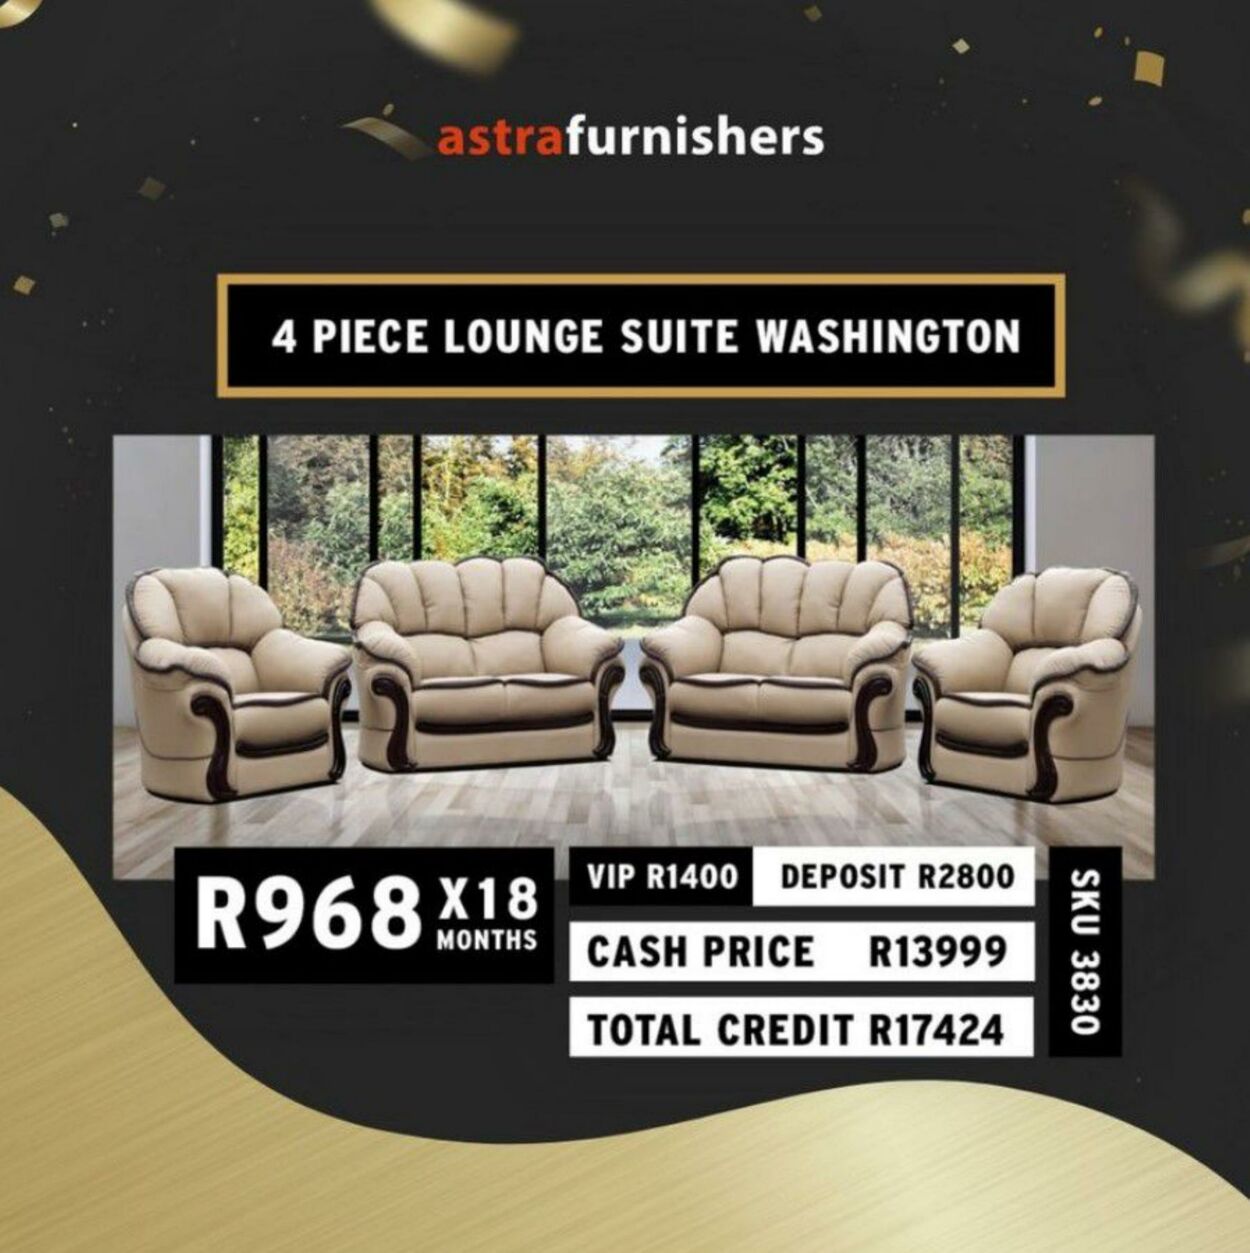 Special Astra Furnishers 23.06.2022 - 27.06.2022